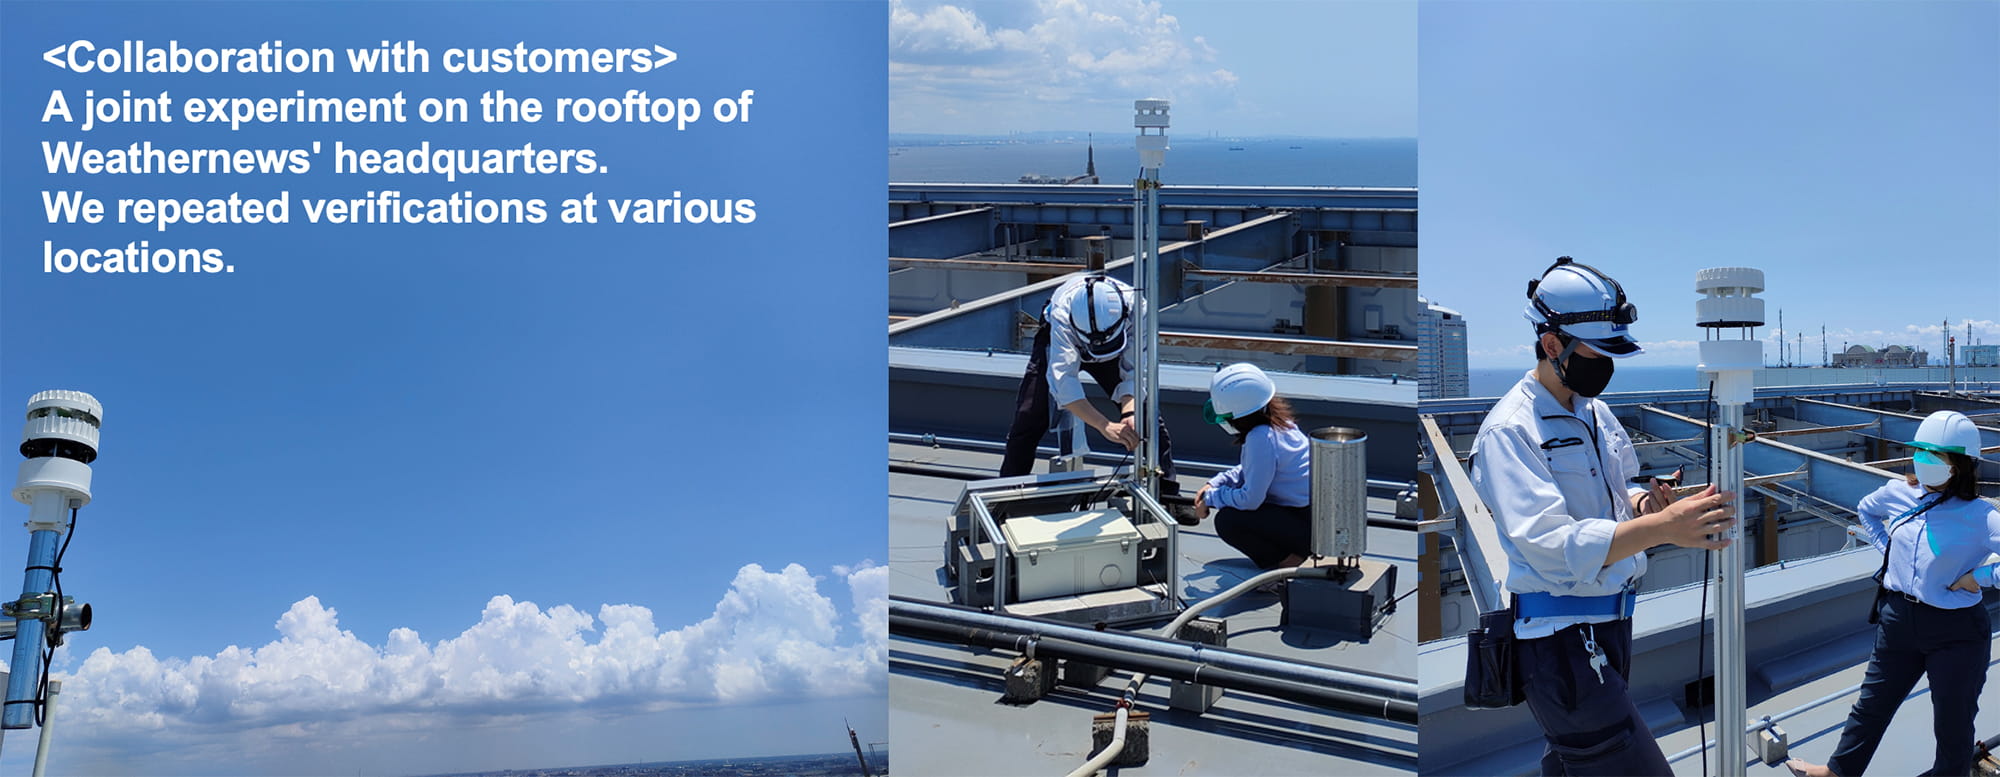 Collaboration with customers: A joint experiment on the rooftop of Weathernews' headquarters. We repeated verifications at various locations.